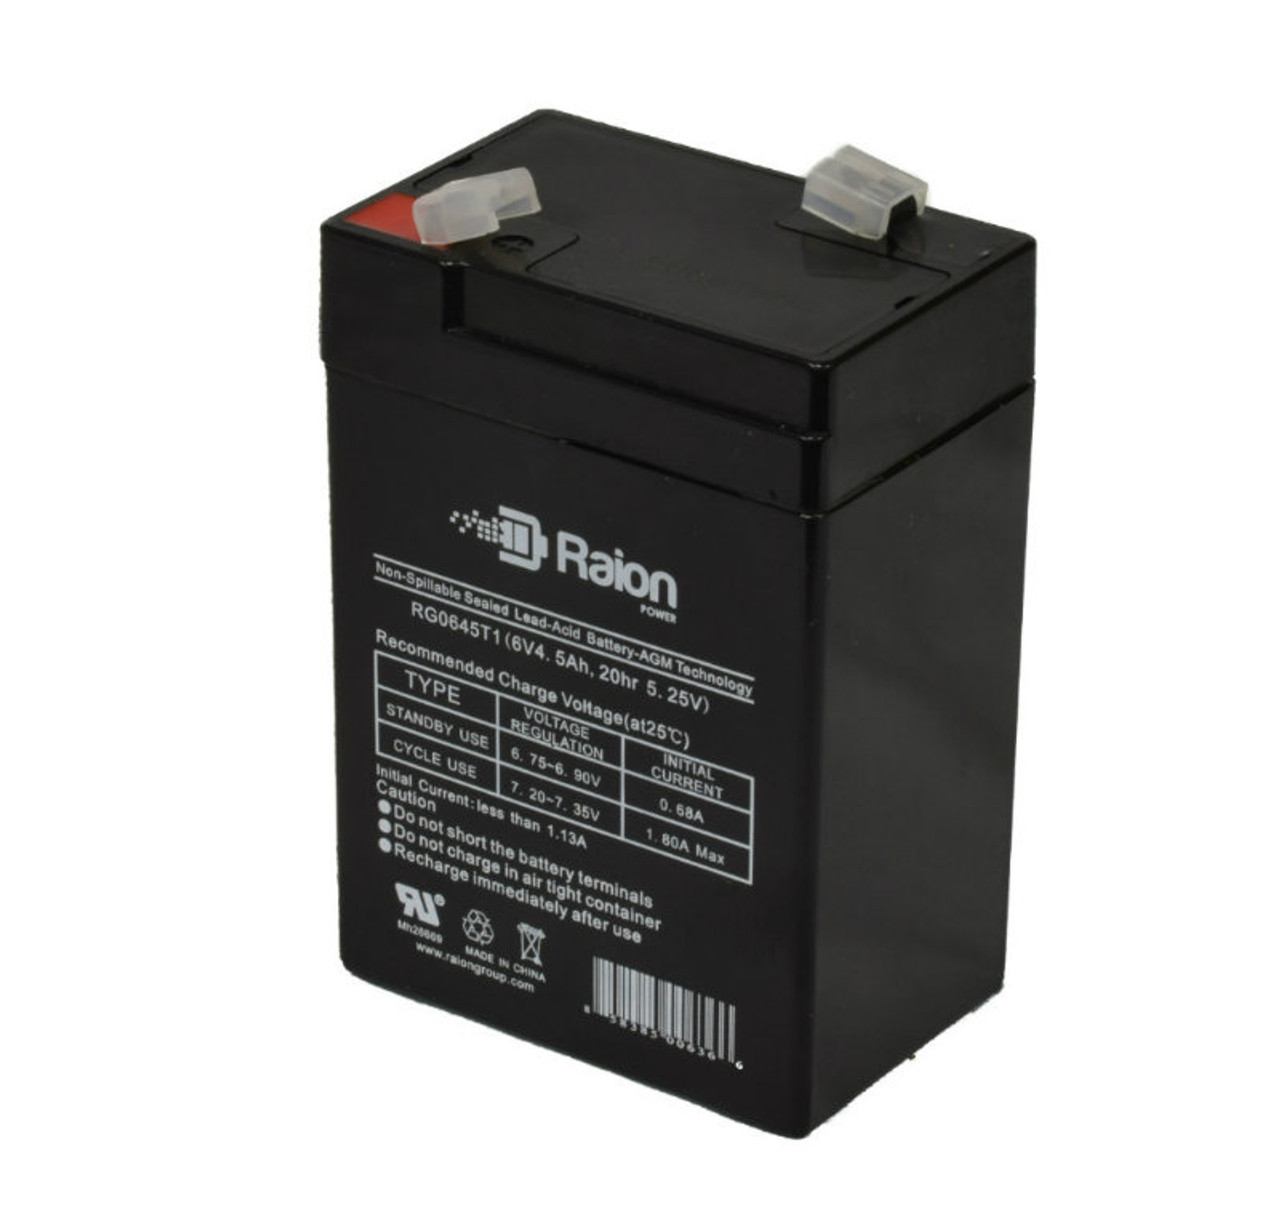 Raion Power RG0645T1 6V 4.5Ah Replacement Battery Cartridge for Interstate SLA3040